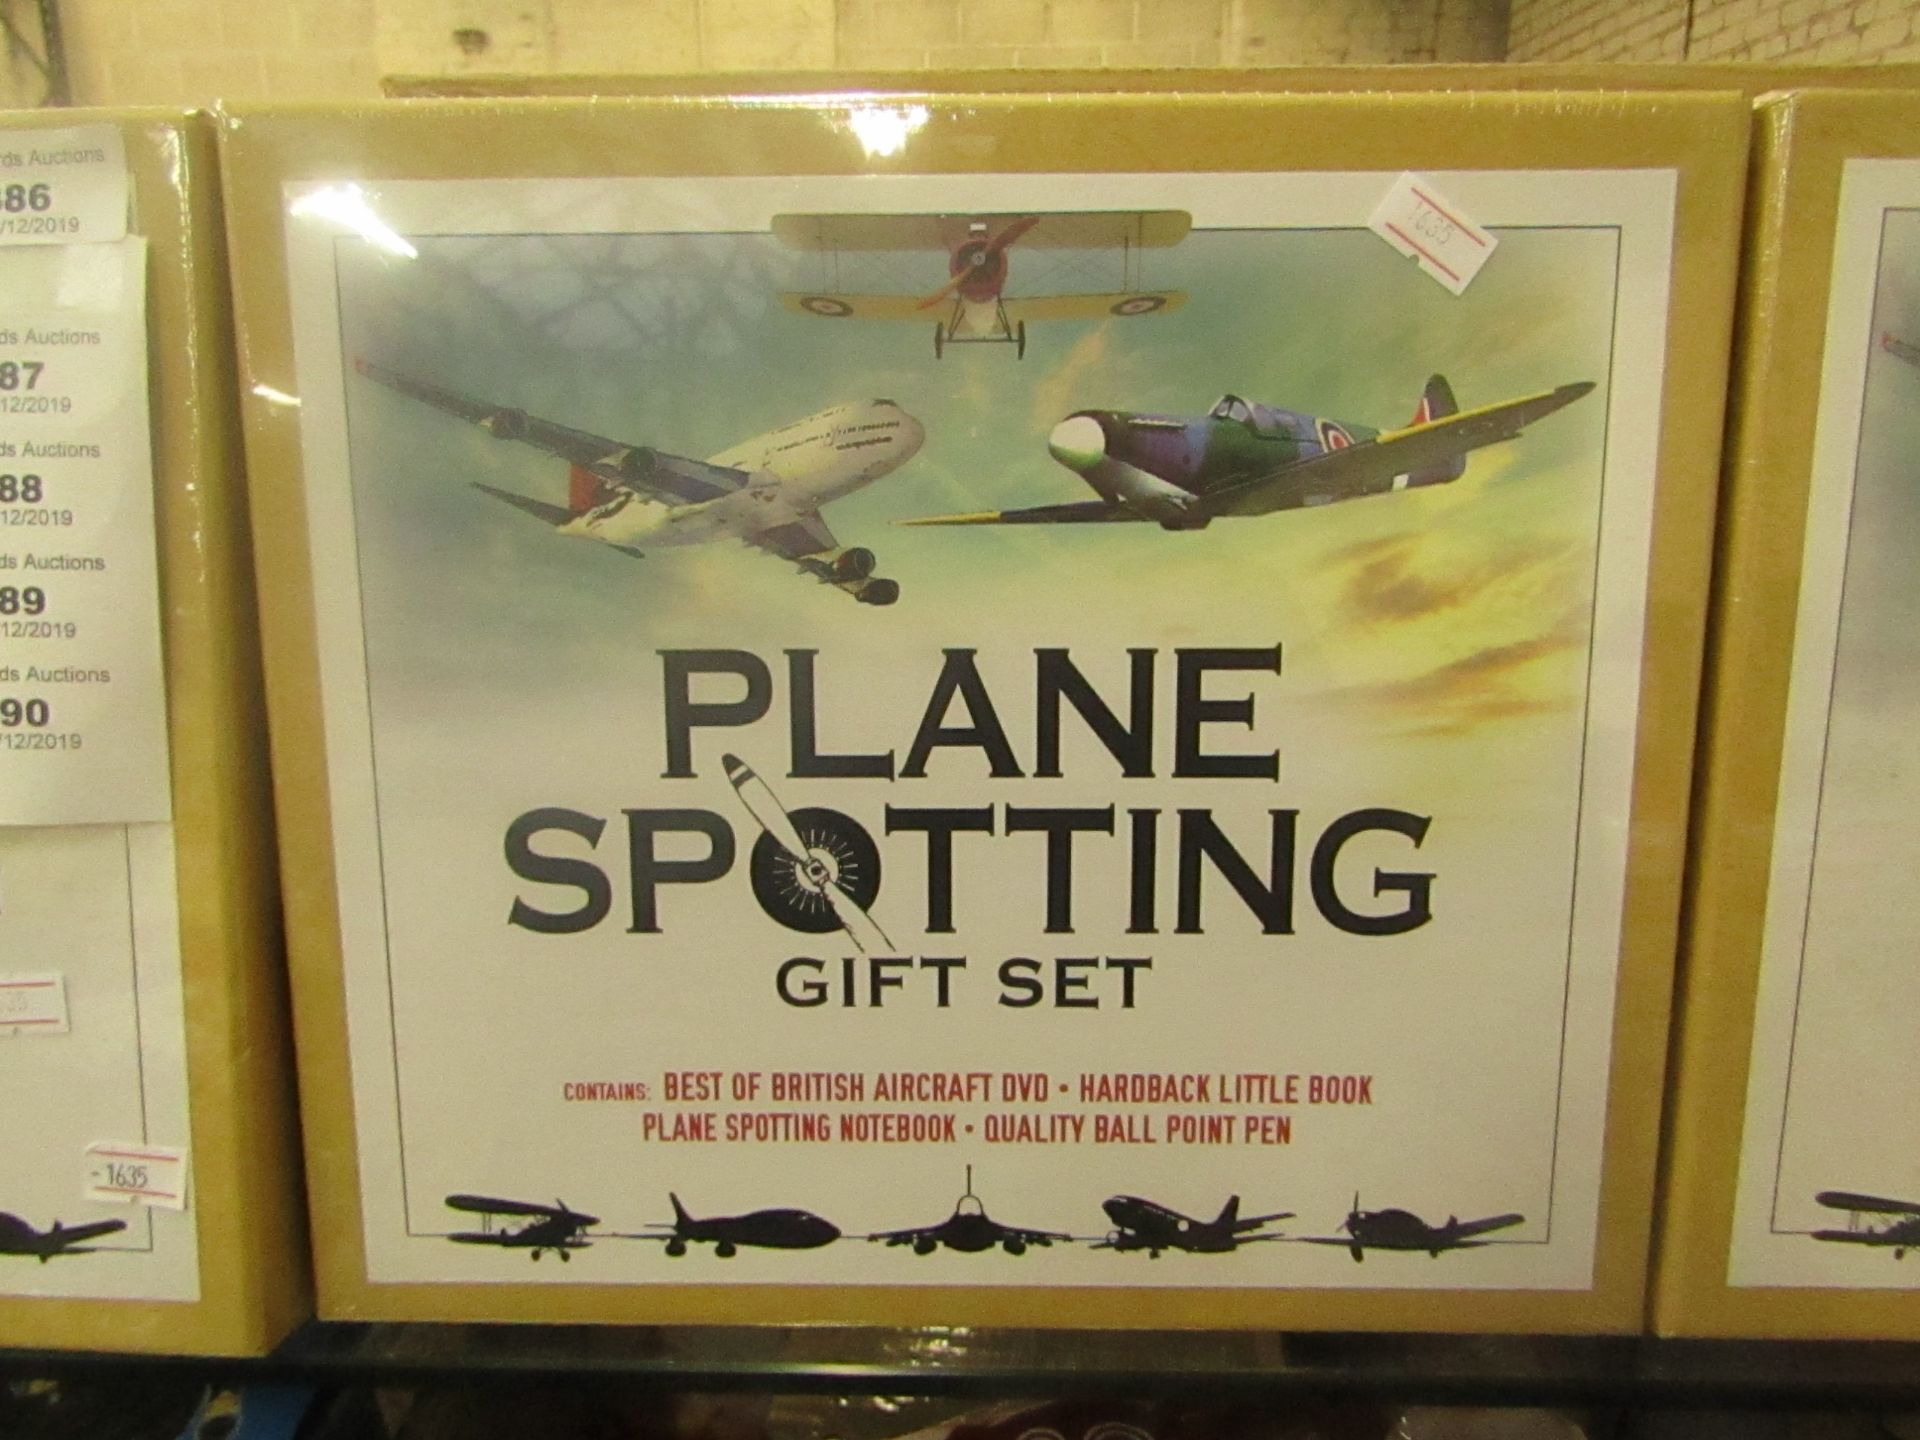 Plane Spotting Gift Set includes DVD, Books & pen. New & in a sealed box